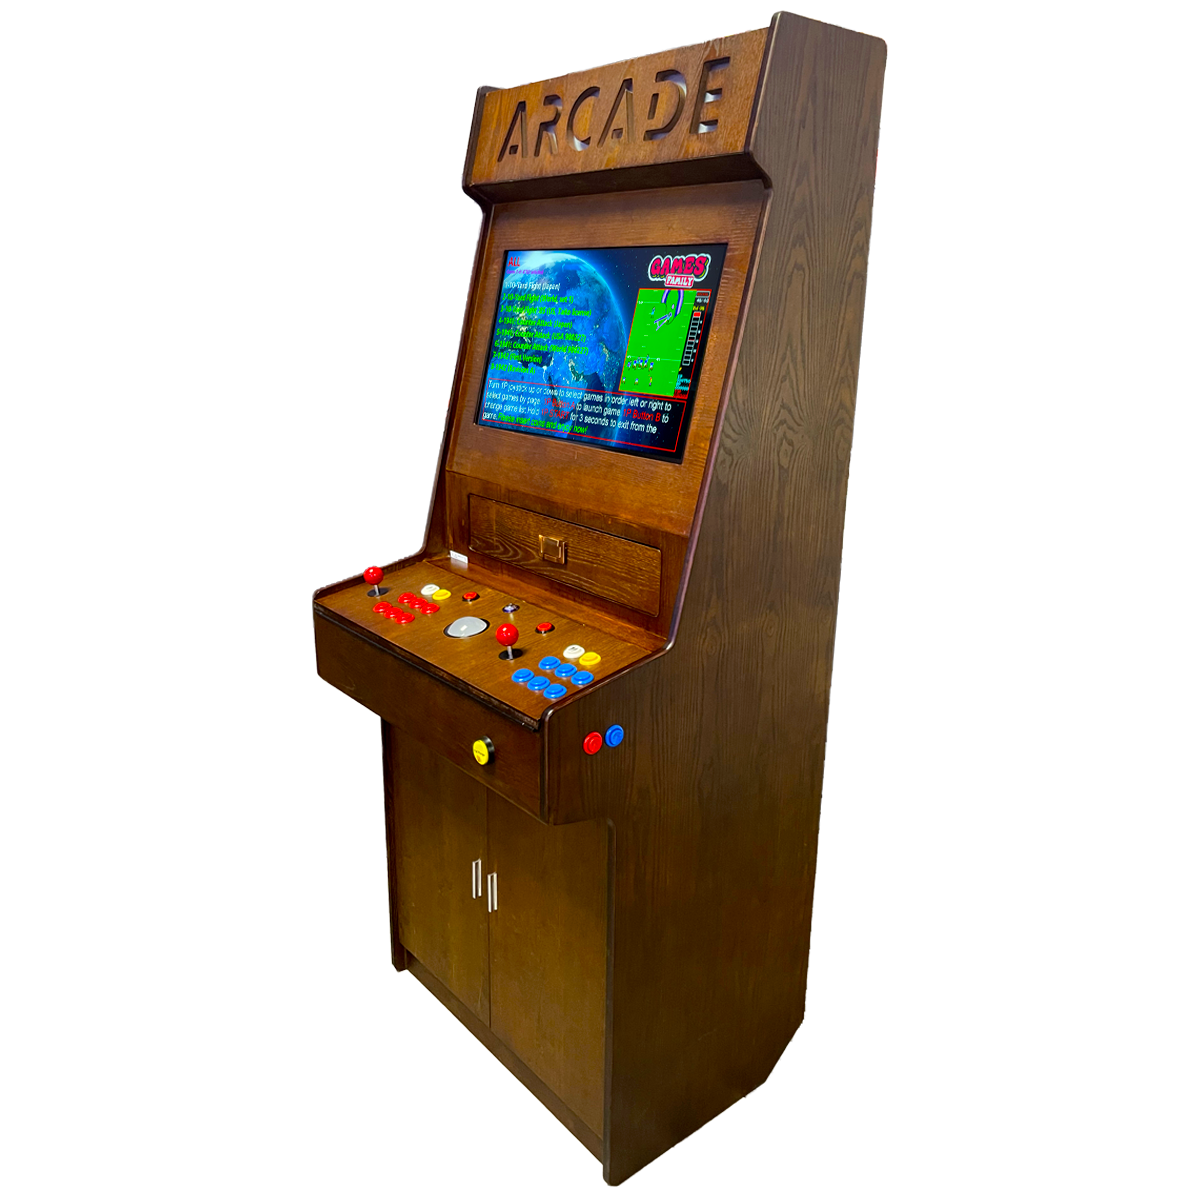 Full-sized two player upright arcade game with wood grain finish (7,000+ games)